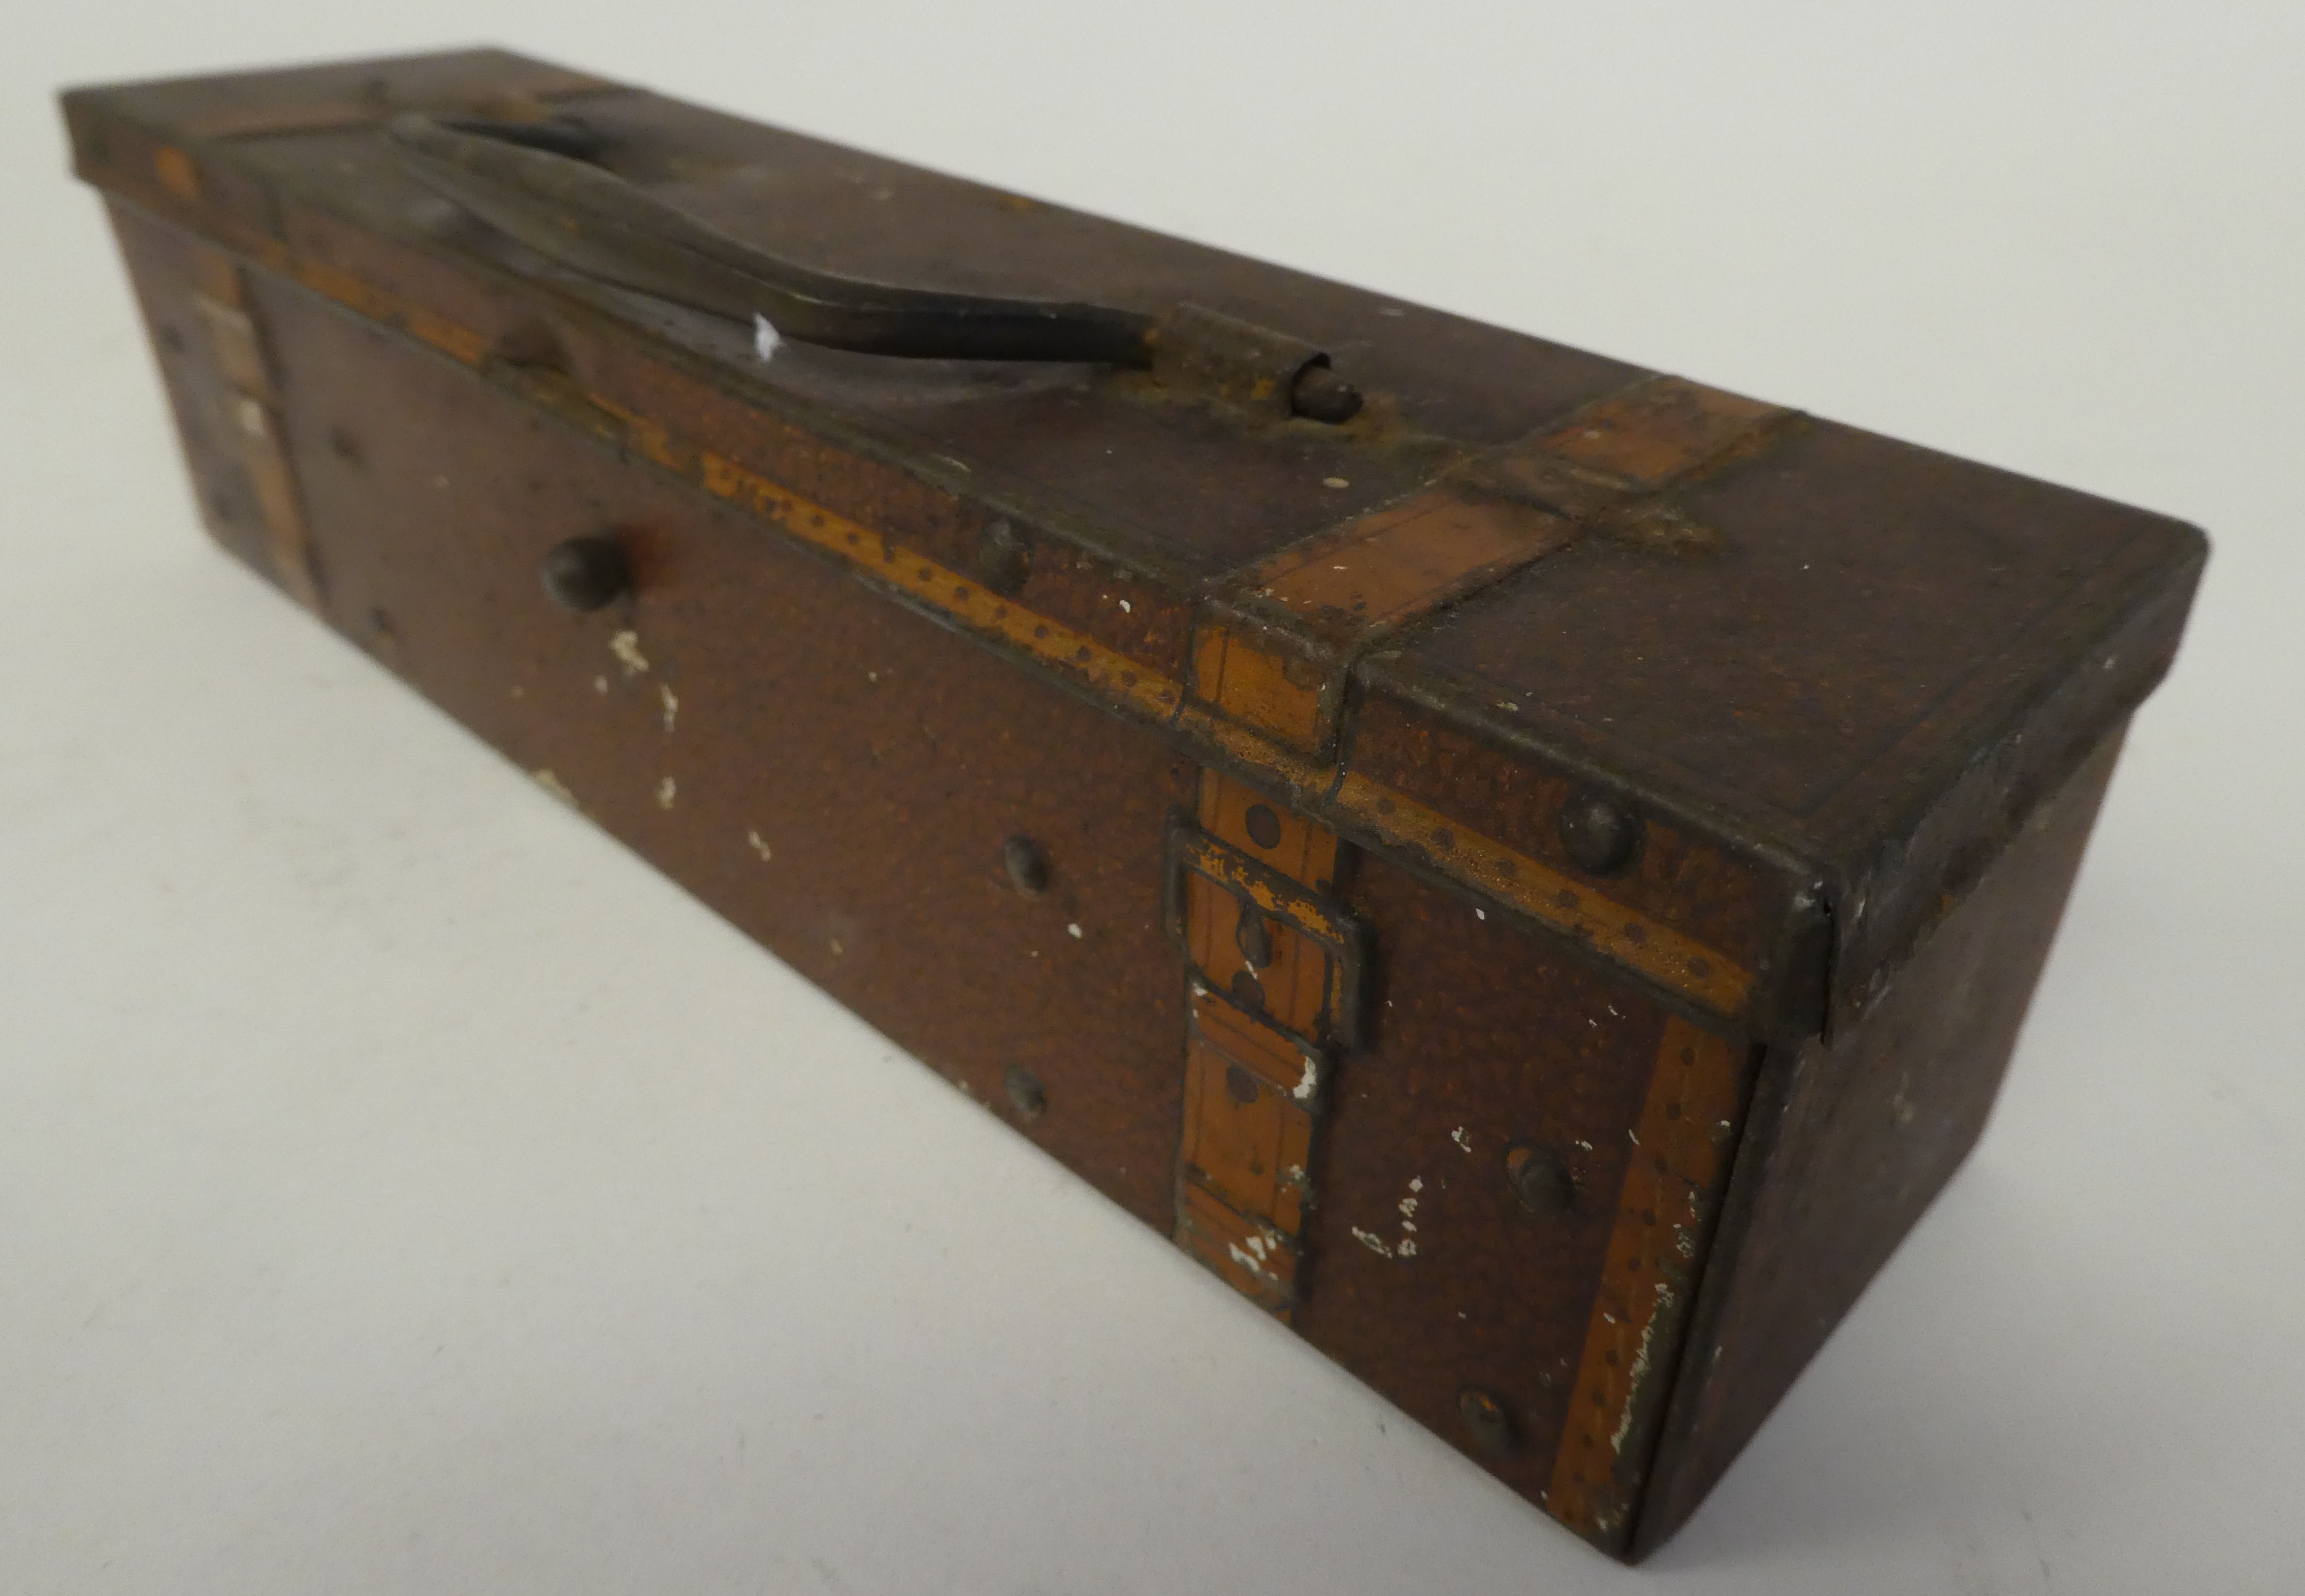 A Vintage Huntley & Palmers printed tinplate biscuit box, fashioned as a trunk with a bail handle